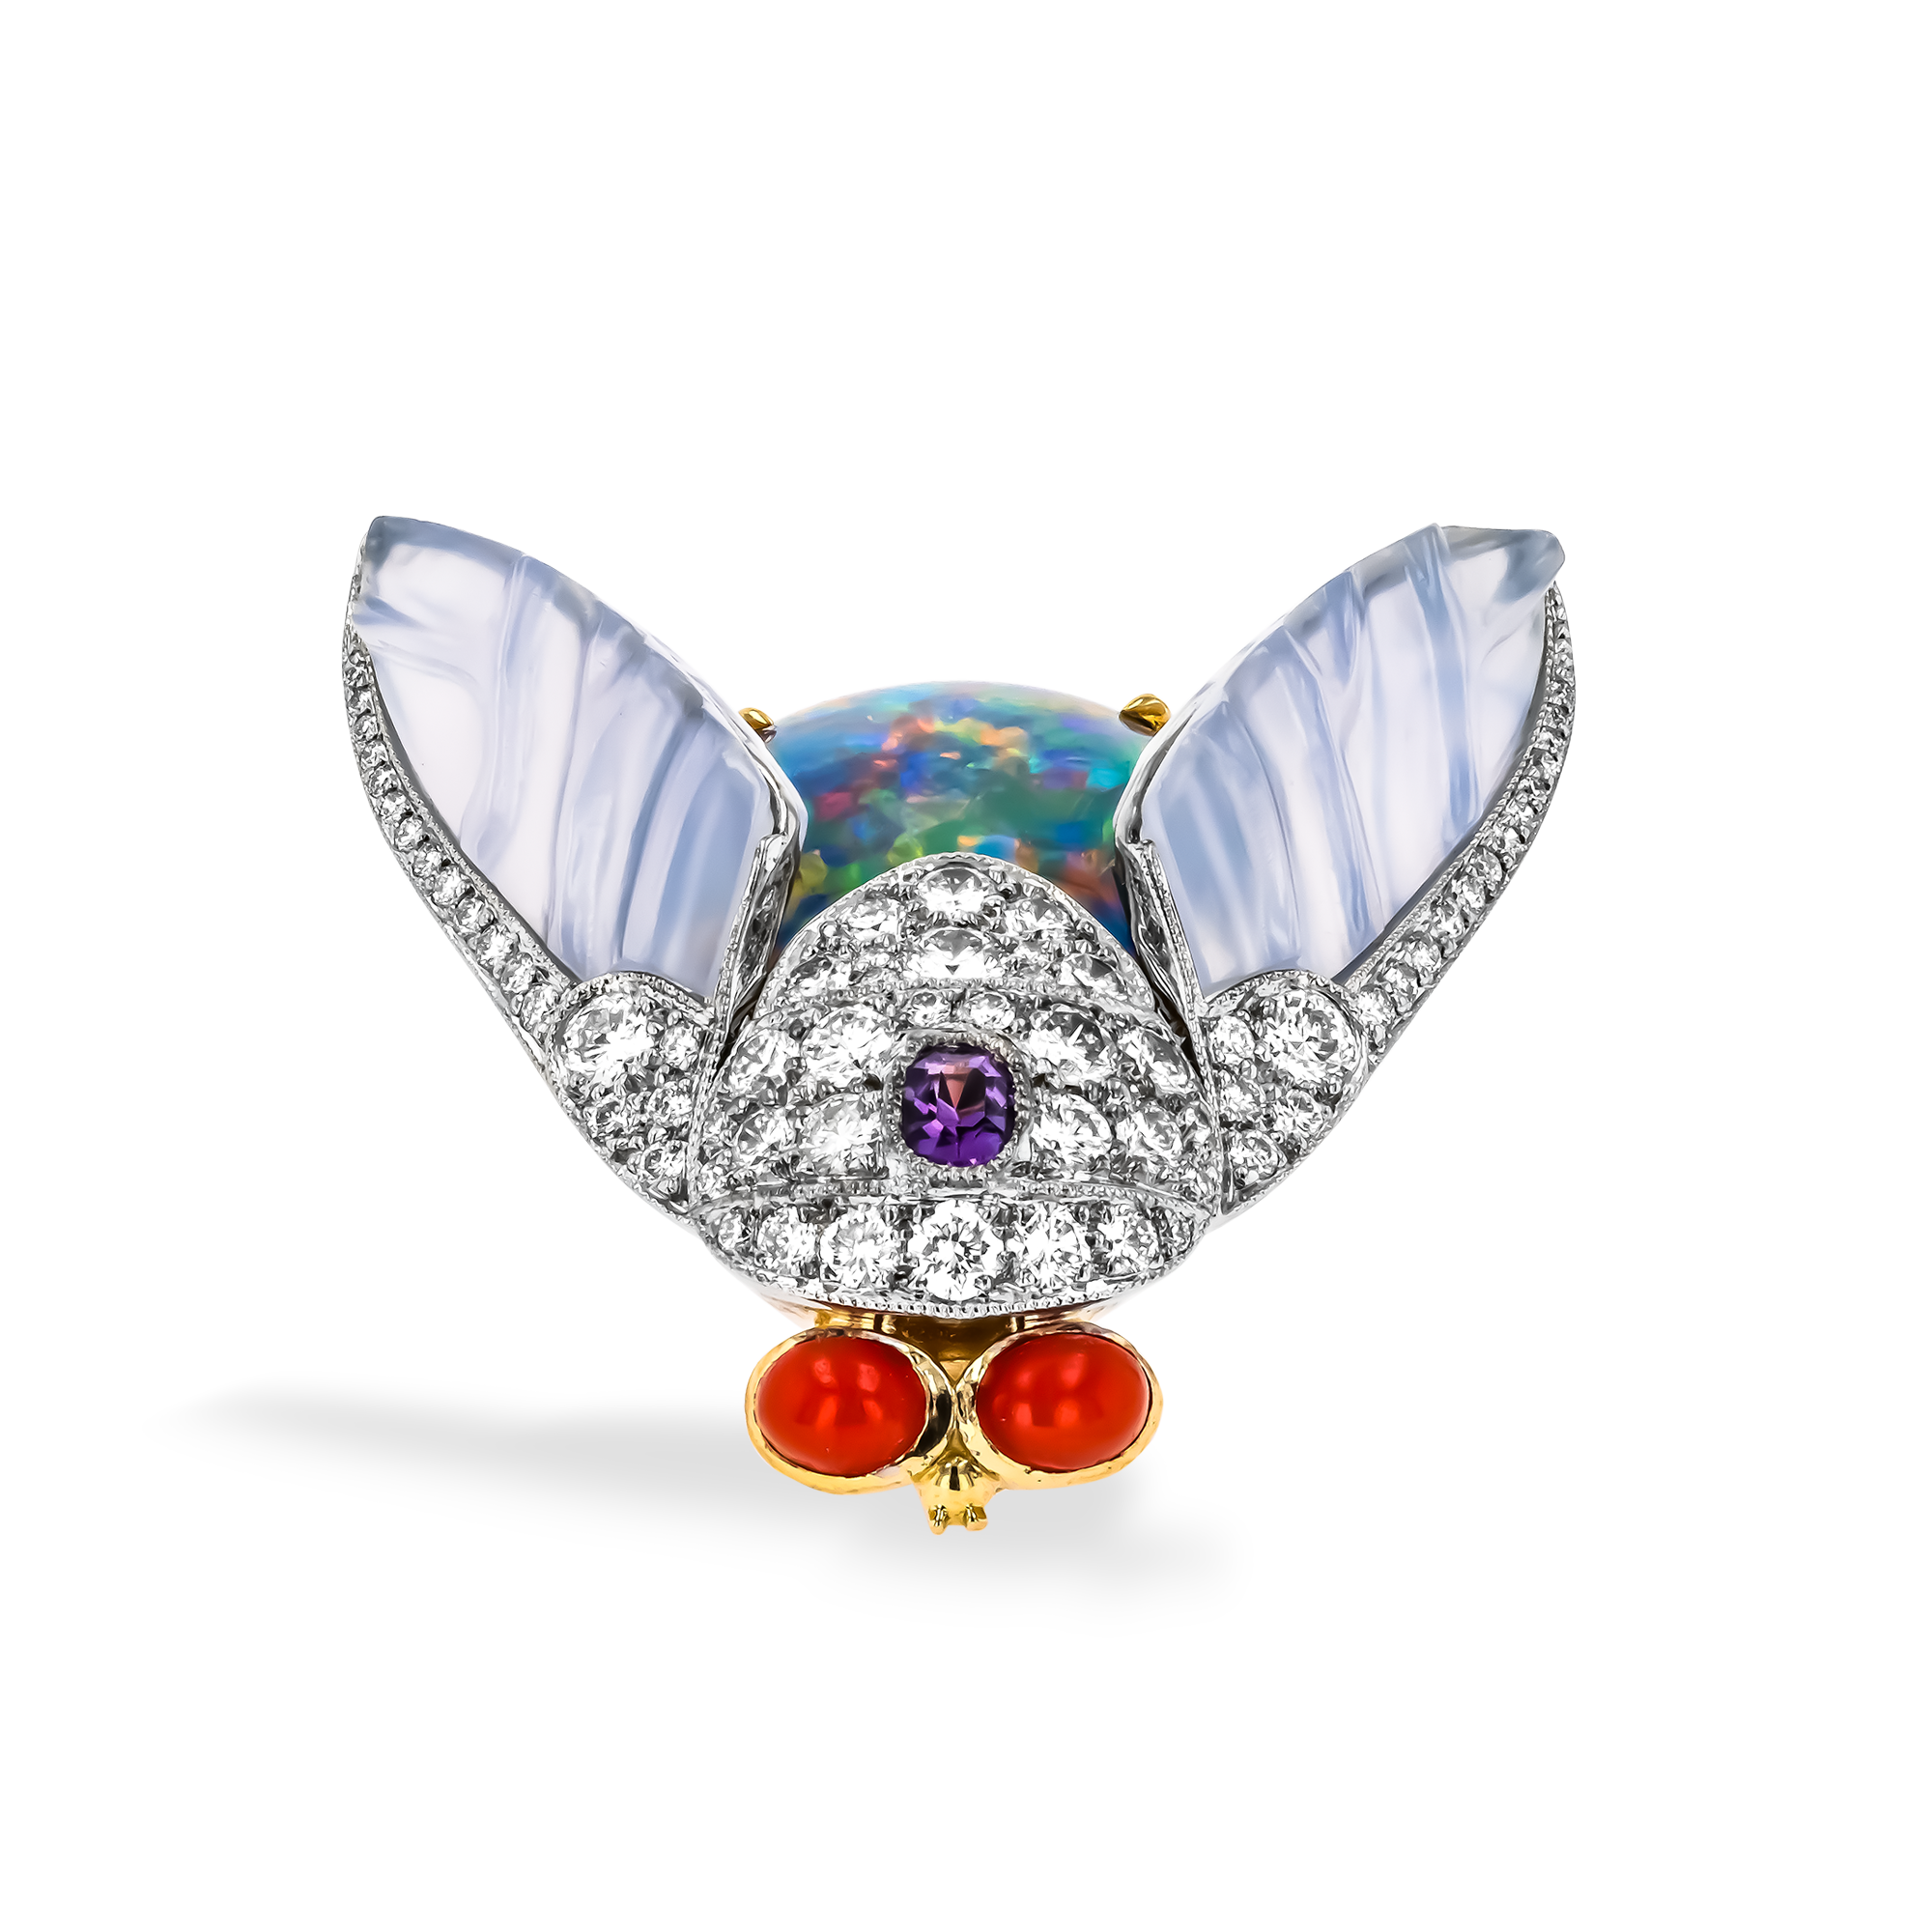 Mixed Cut Opal & Amethyst Brooch GIA Certified with Diamonds_2